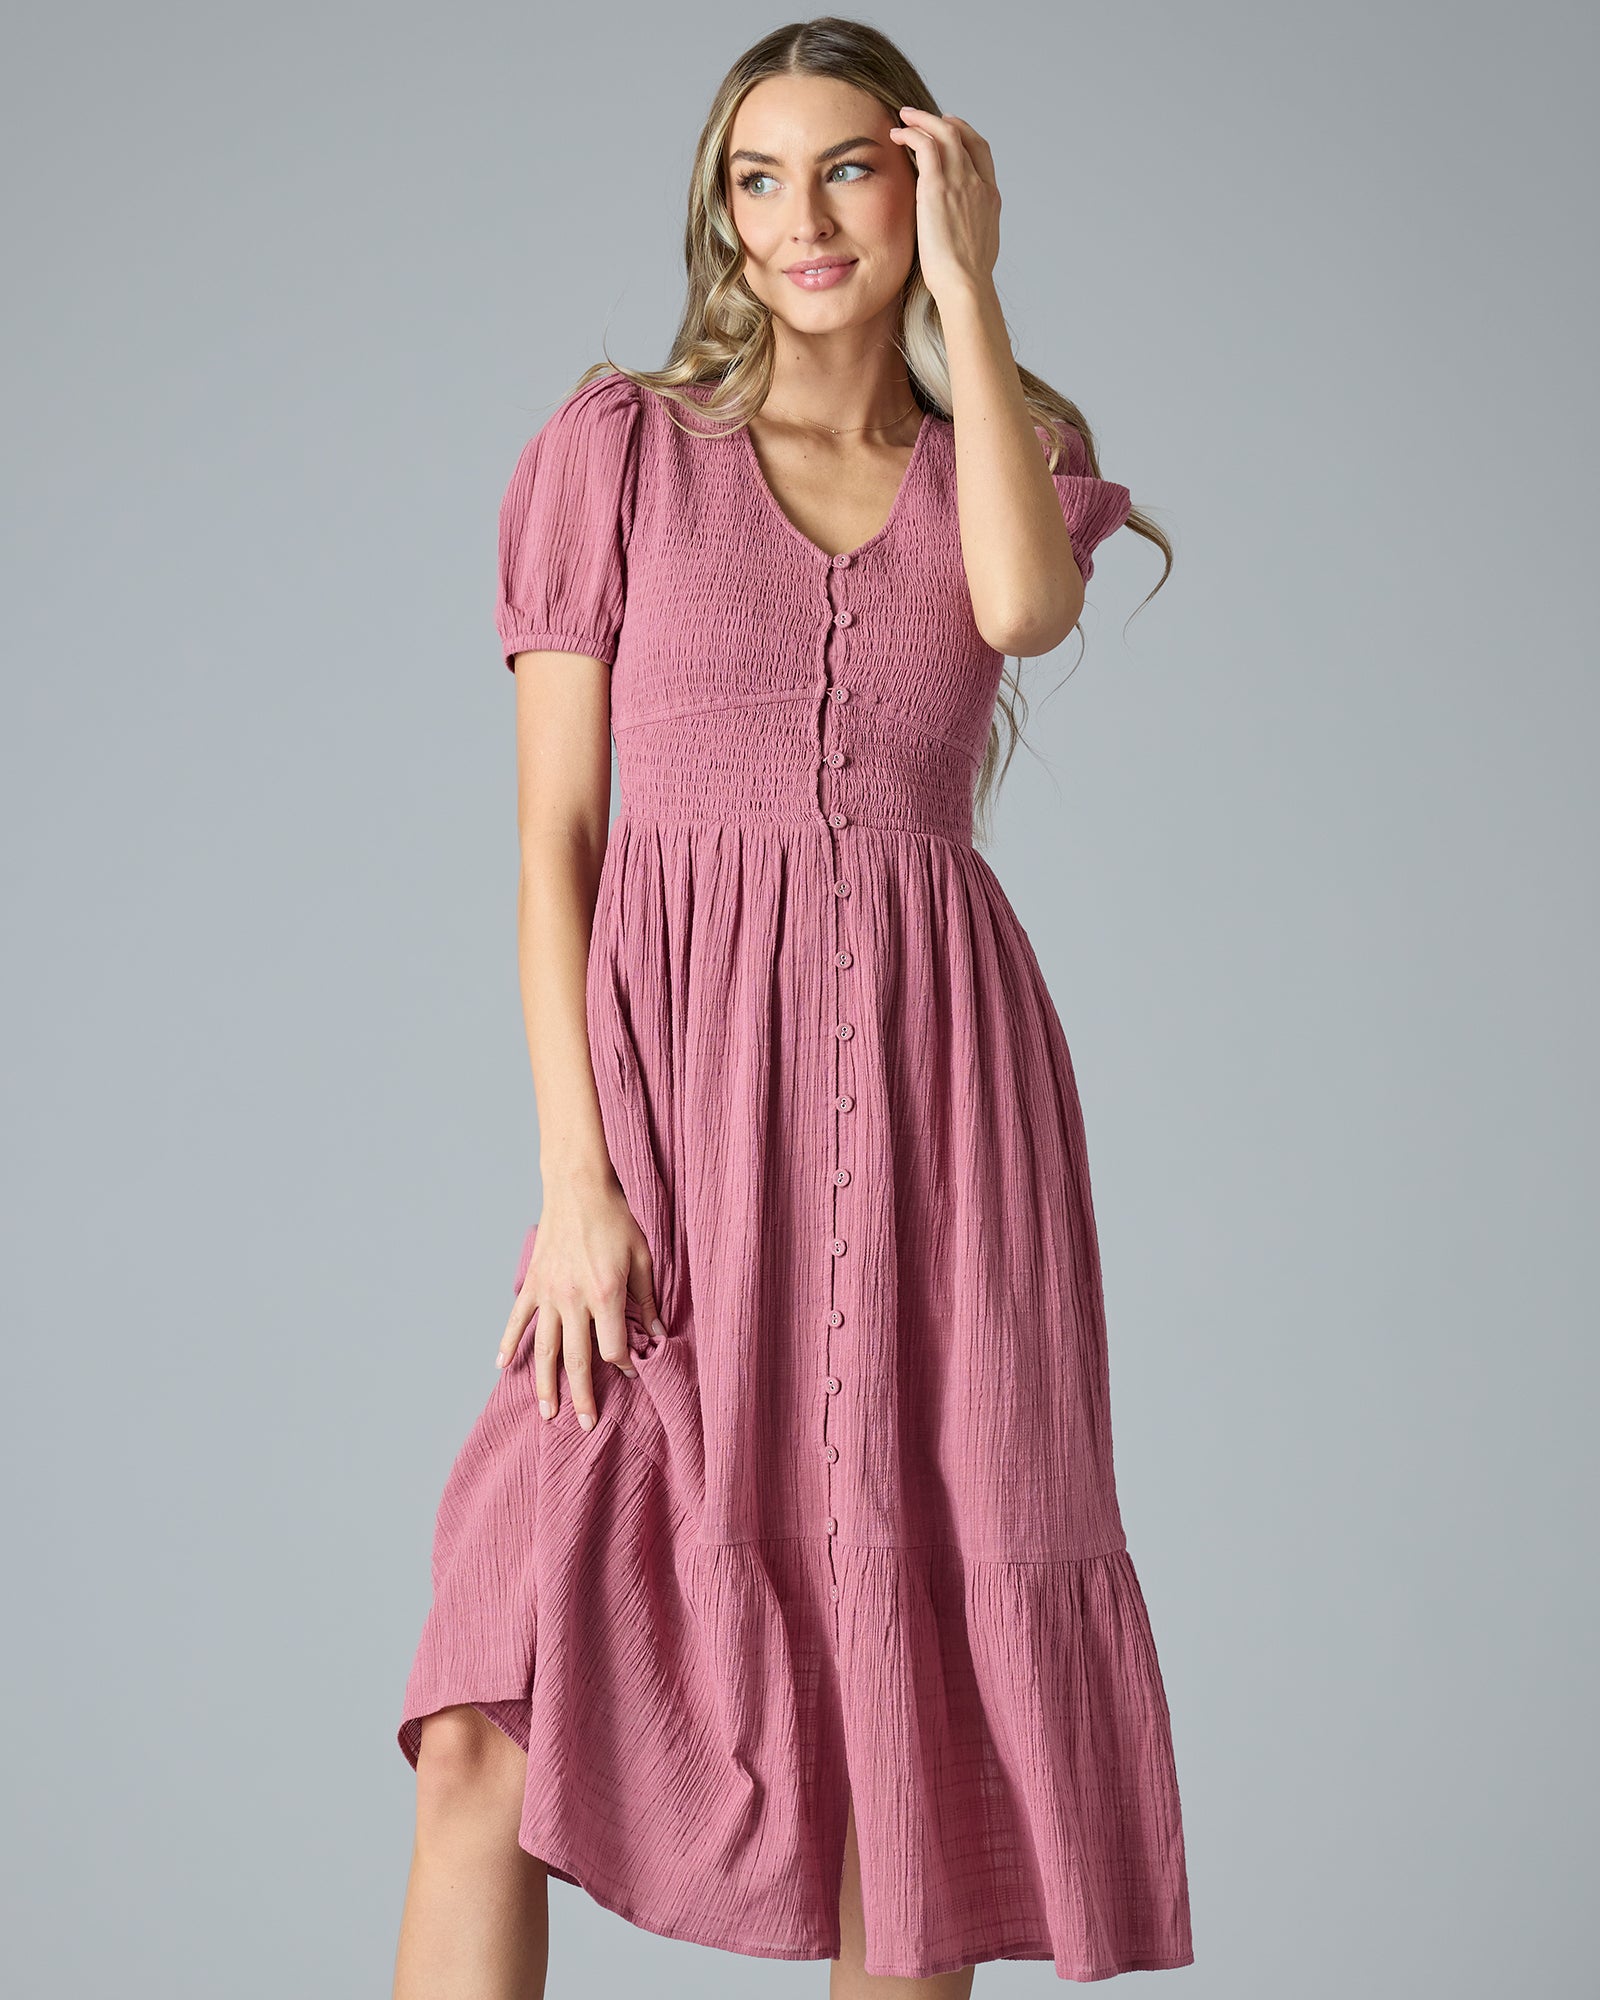 Woman in a pink short sleeve, v-neck, midi-length dress with buttons down the front